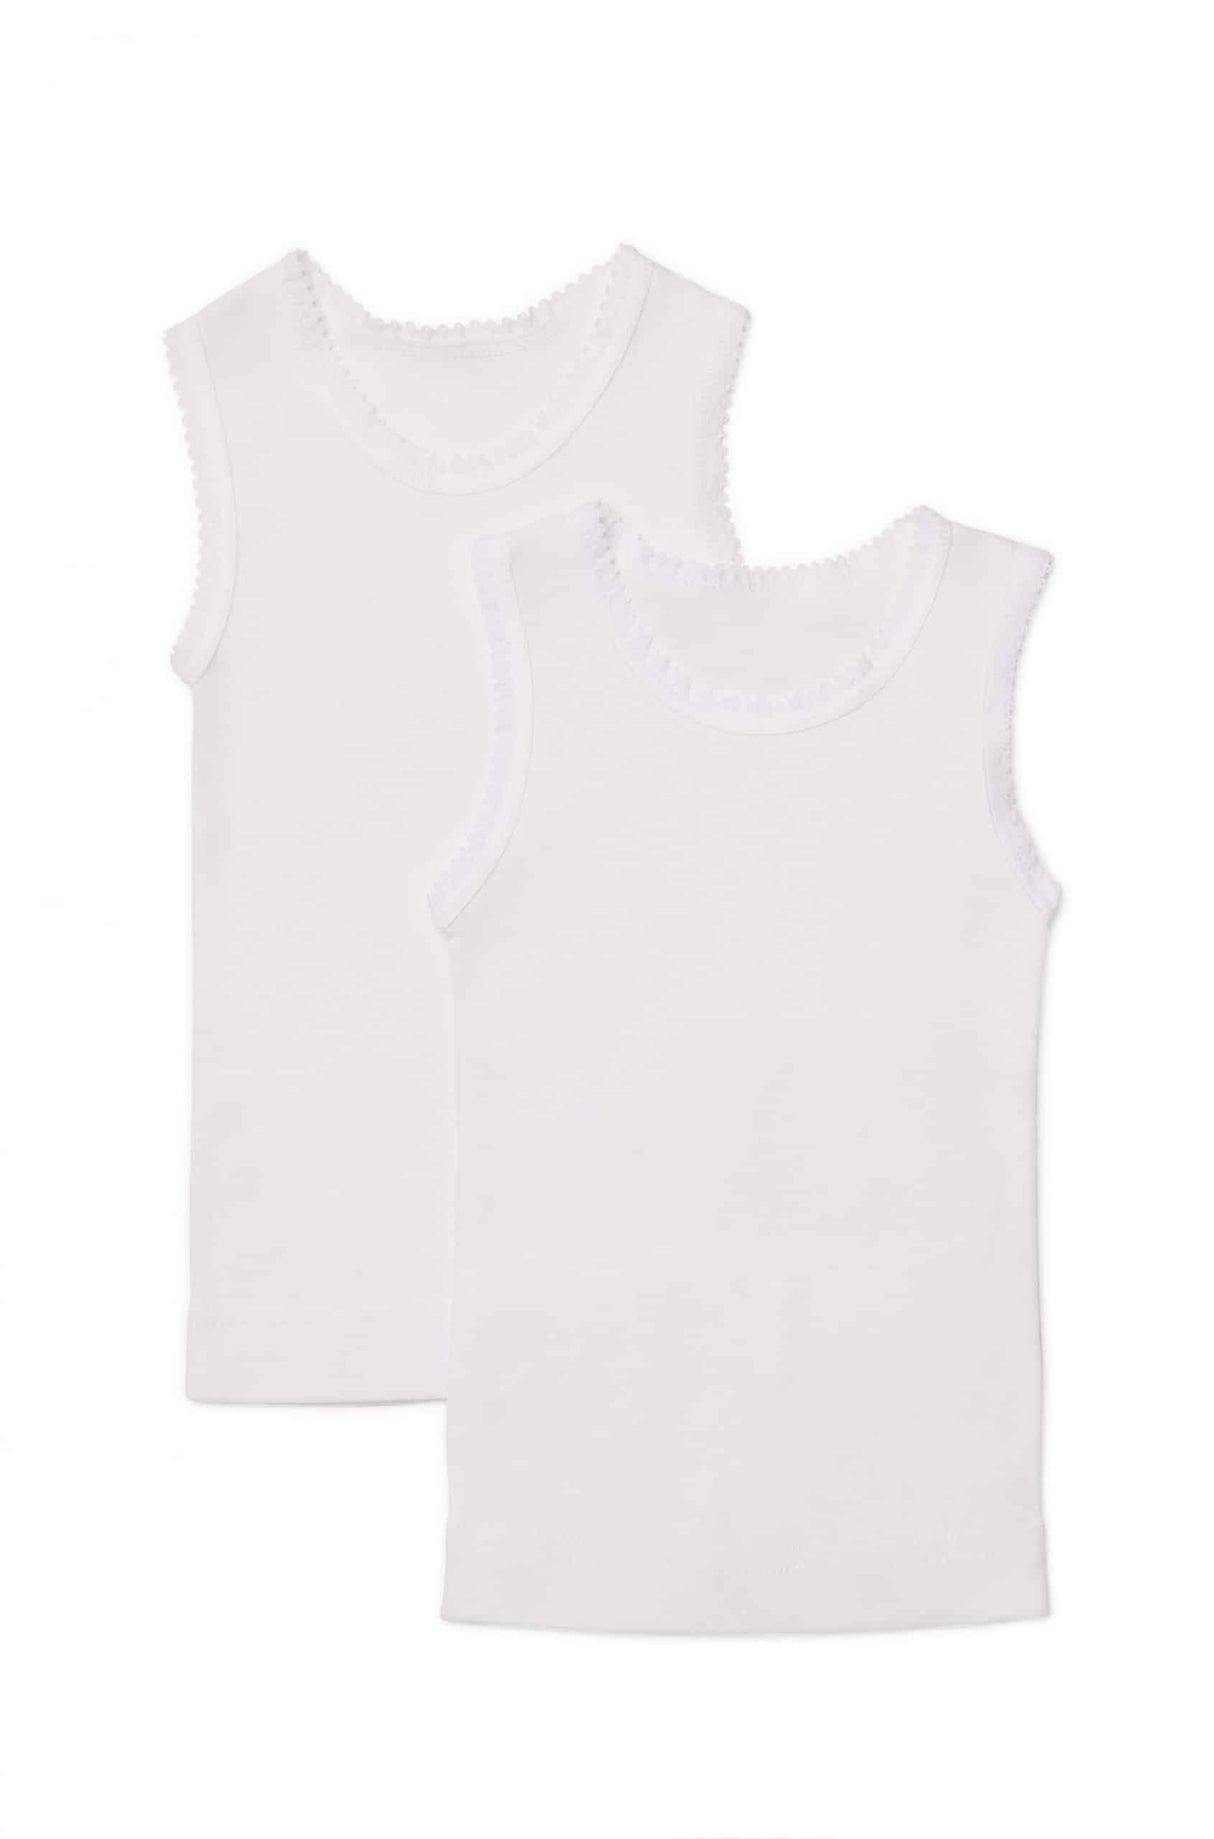 Baby Lace Trim Singlets 2 Pack